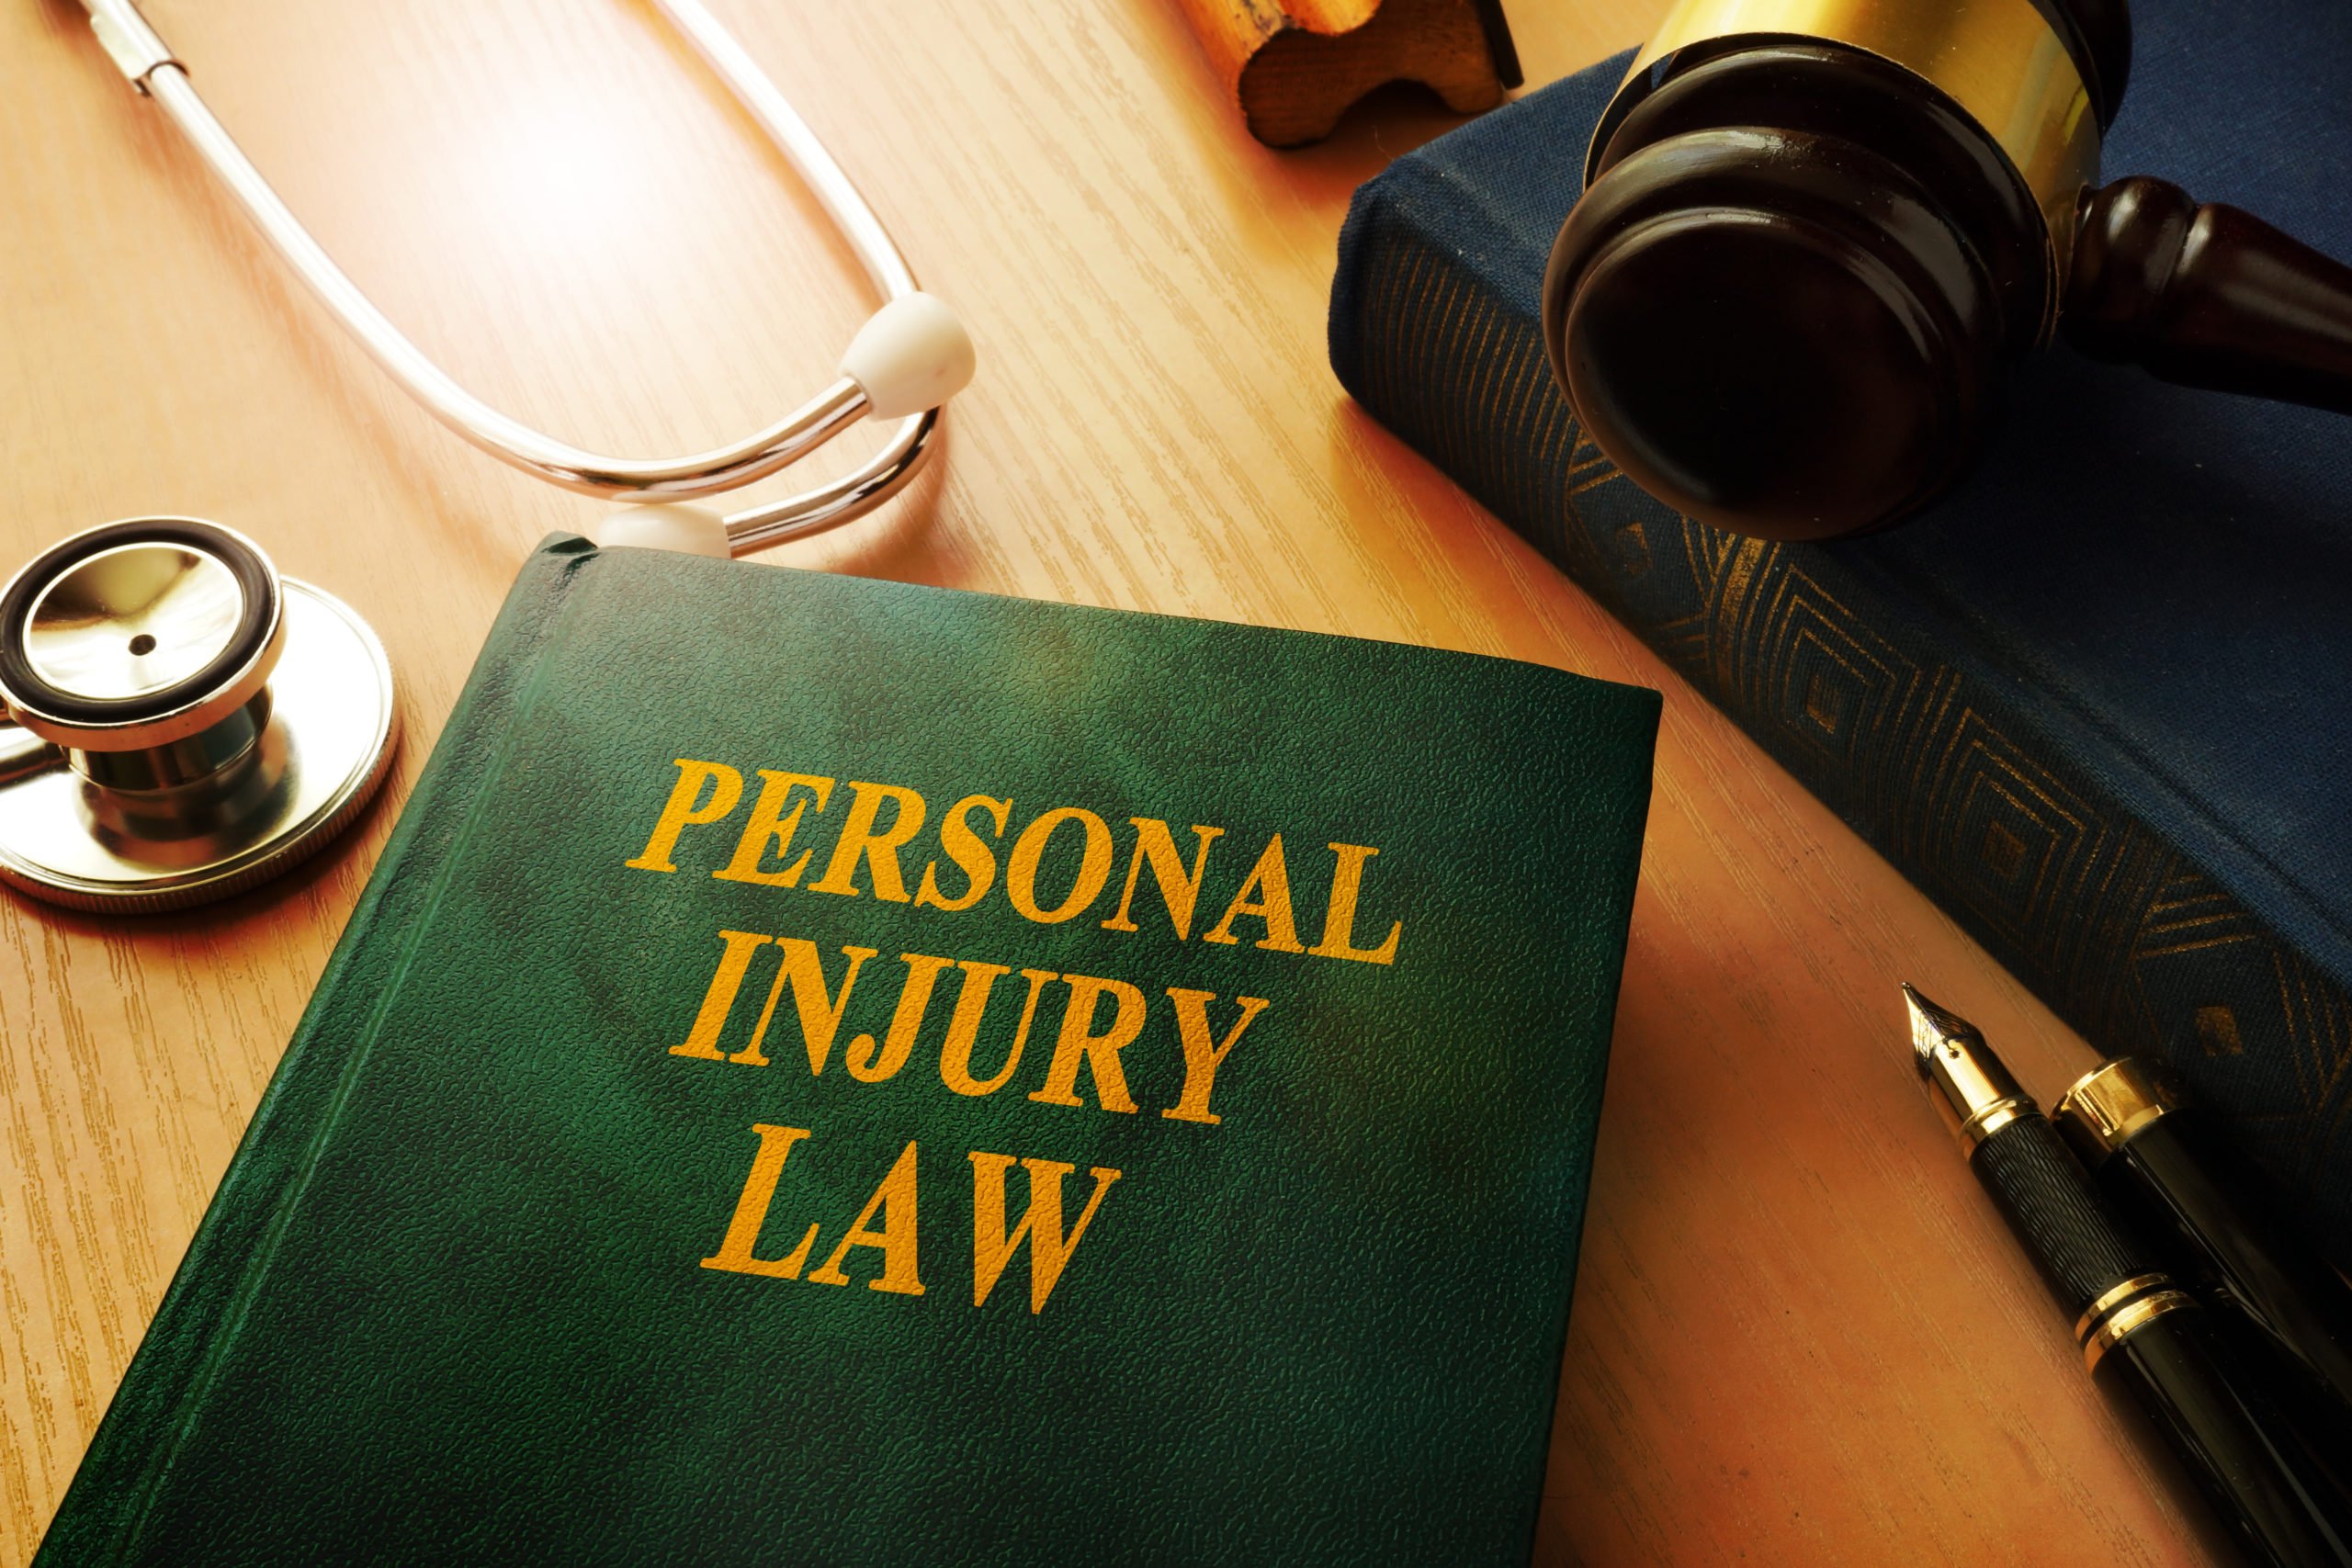 Workers Compensation Lawyer